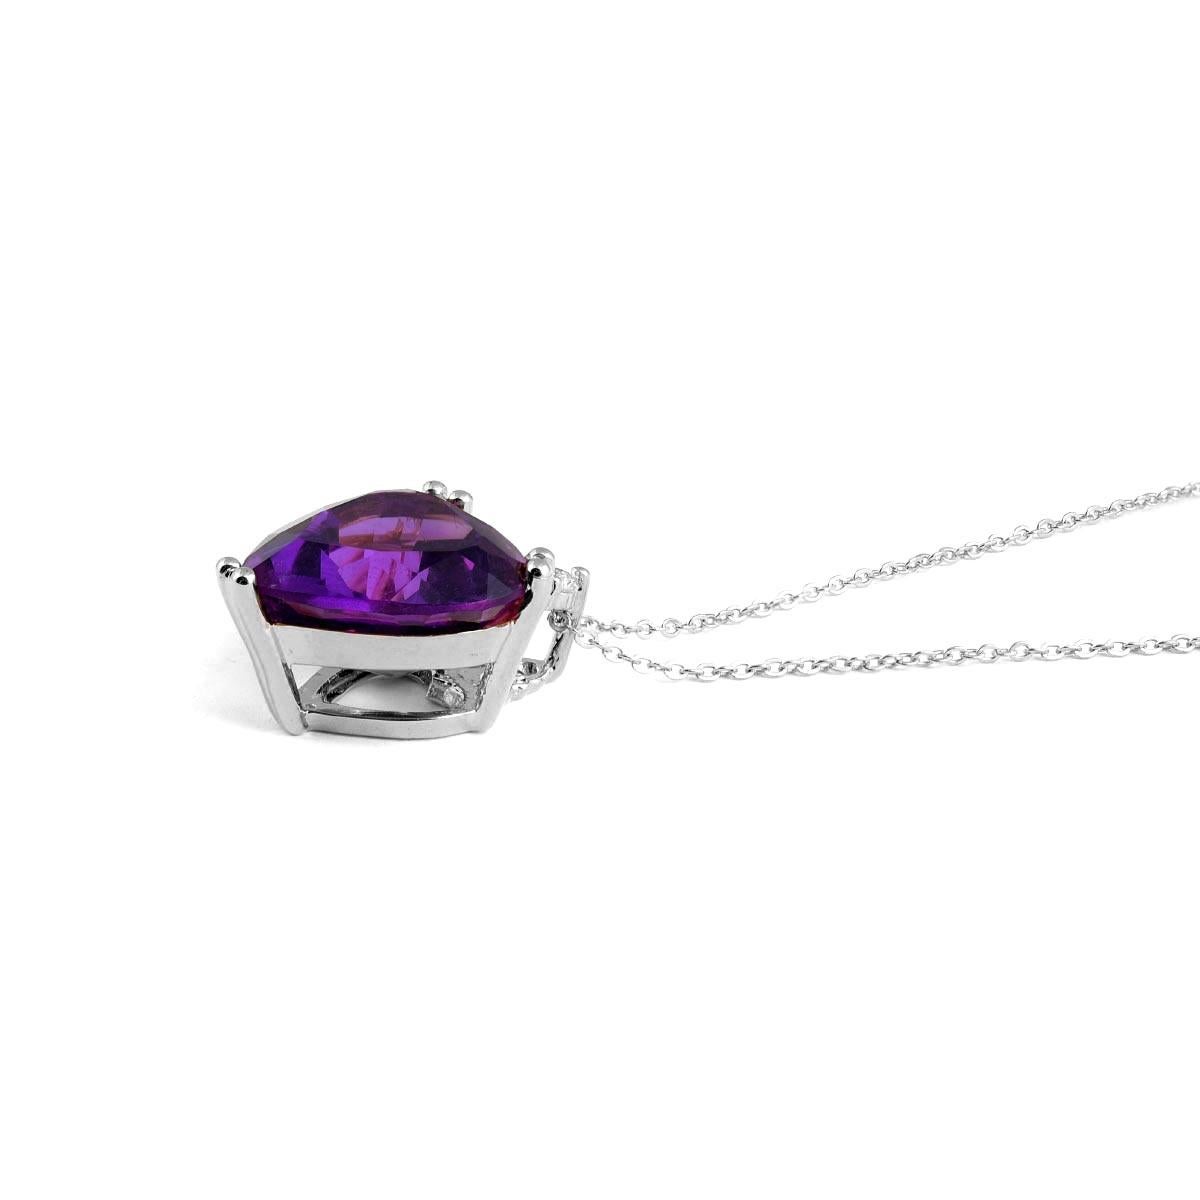 Mixed Cut 2.51 Carats AAA Natural Amethyst Diamonds set in 14K White Gold Pendant For Sale